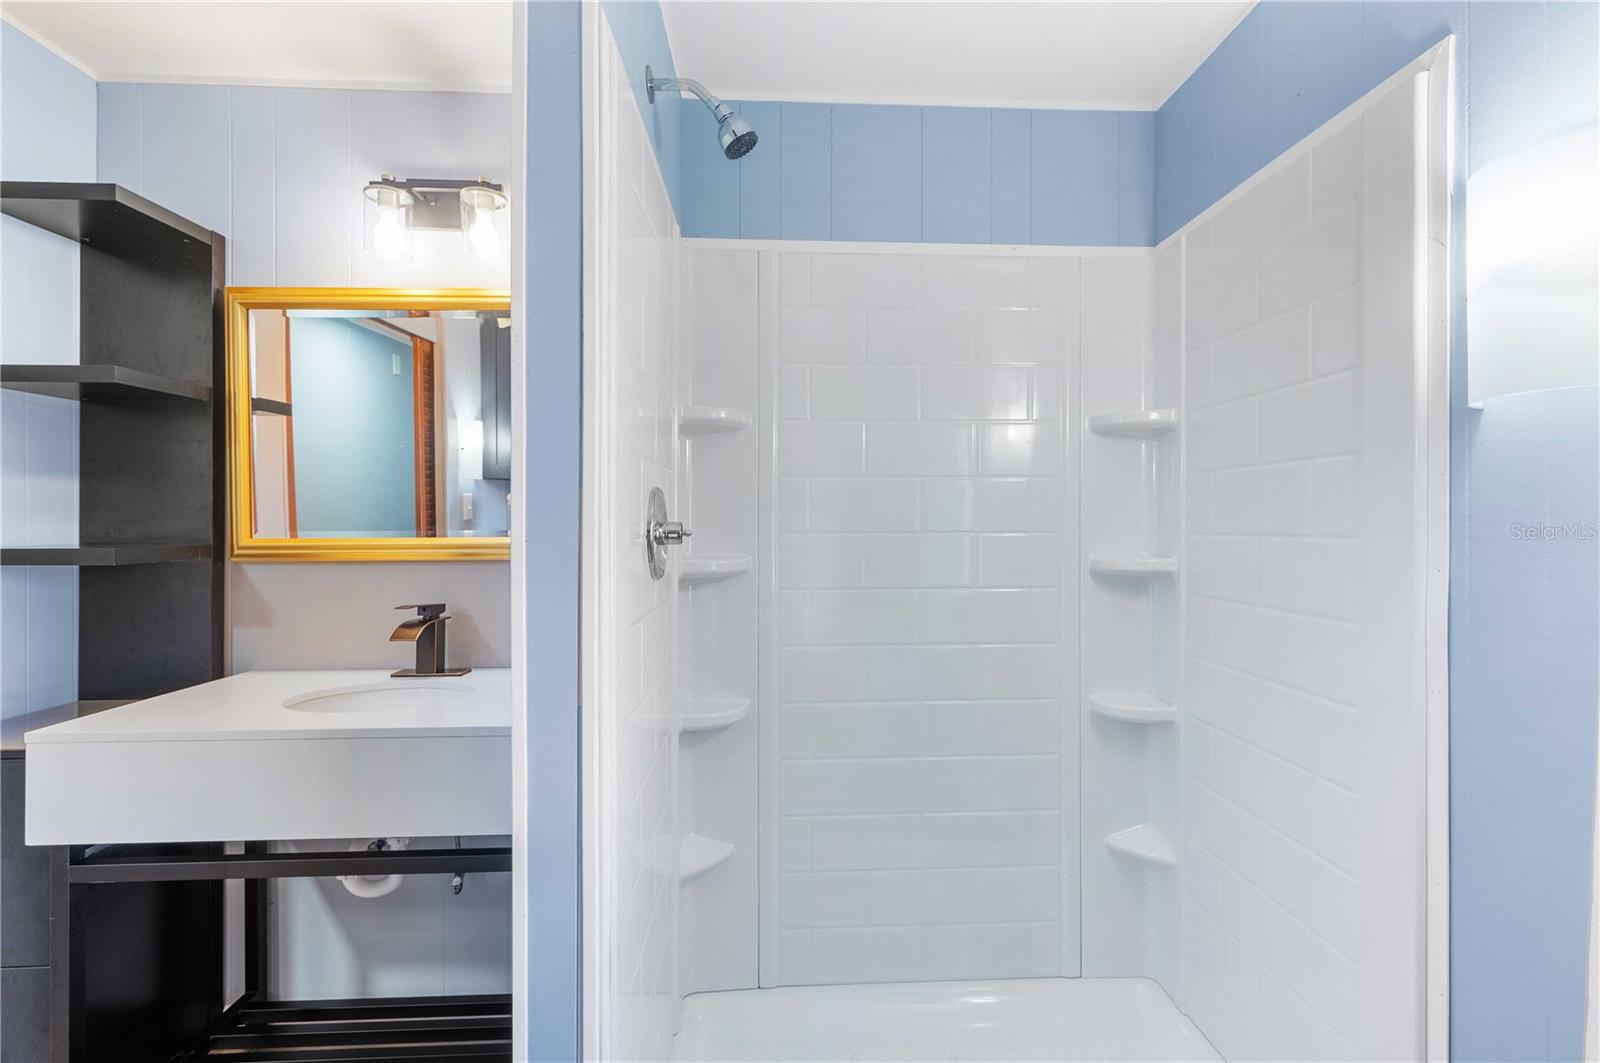 This bathroom has new step-in shower, vanity, flooring, light fixtures, and high toilet.